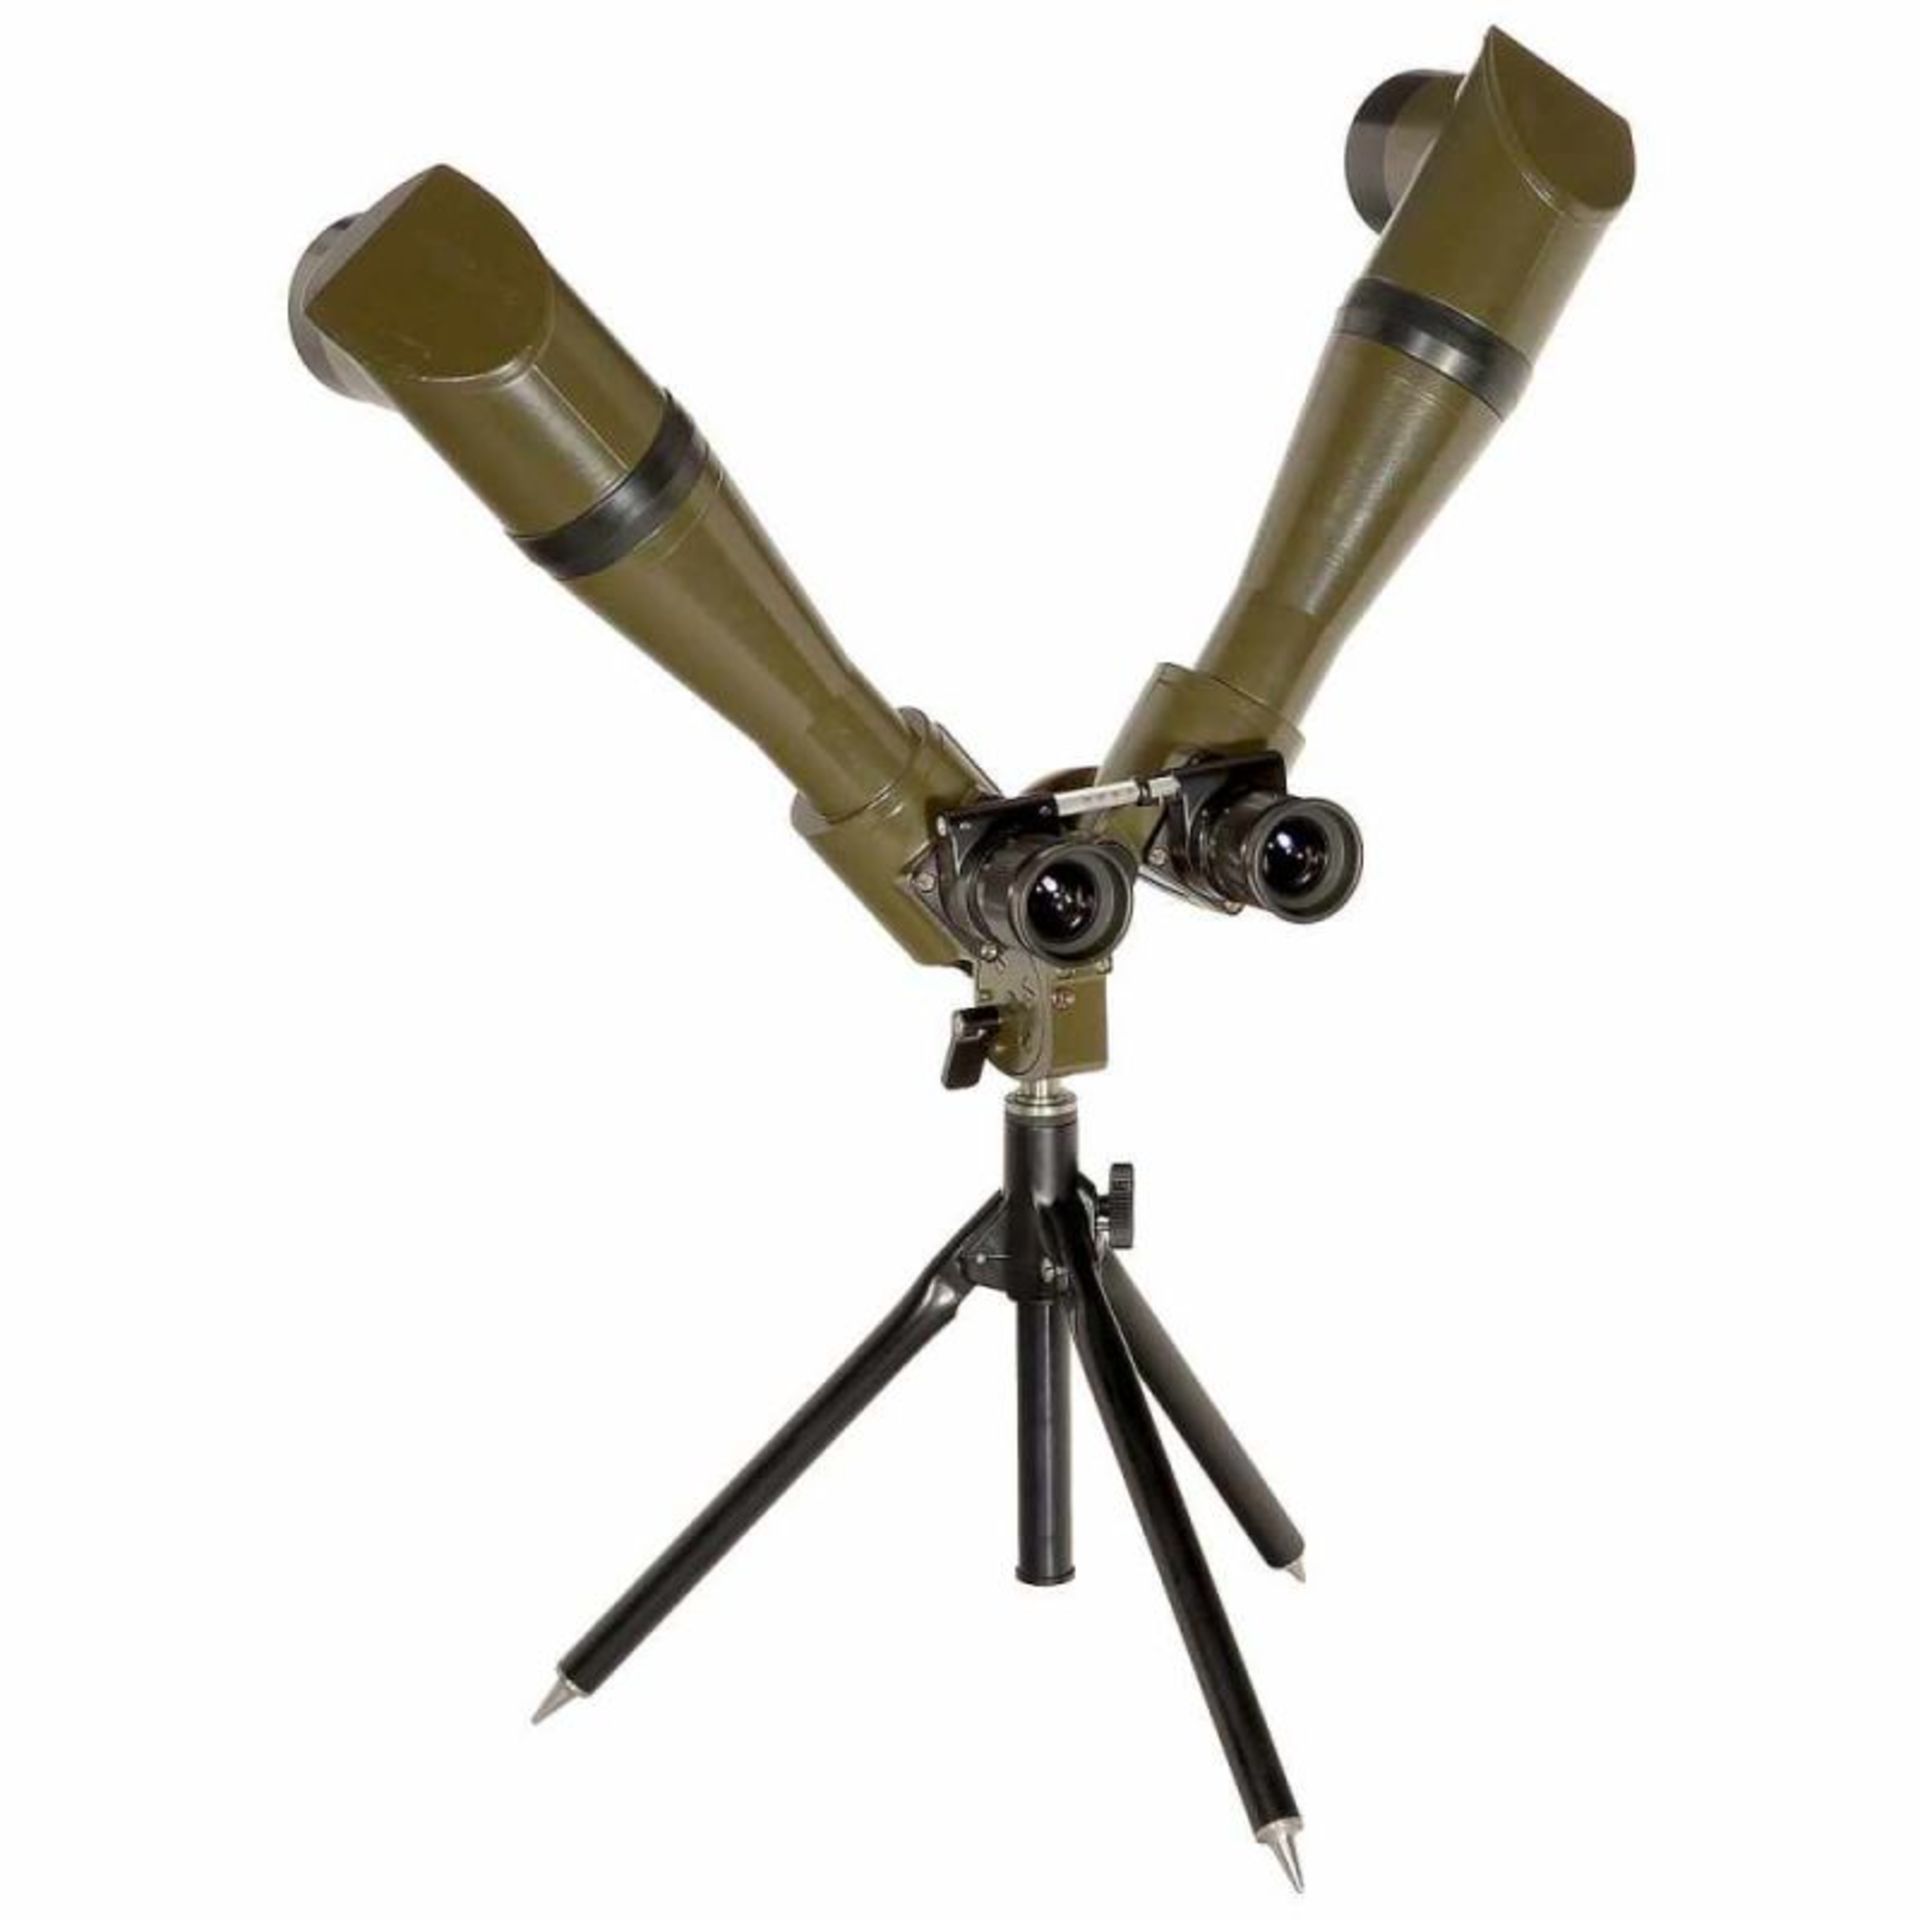 Kern Periskop Gonio 10 x 50, 1977 Swiss twin telescope, no. 448, with tripod. A high-end product for